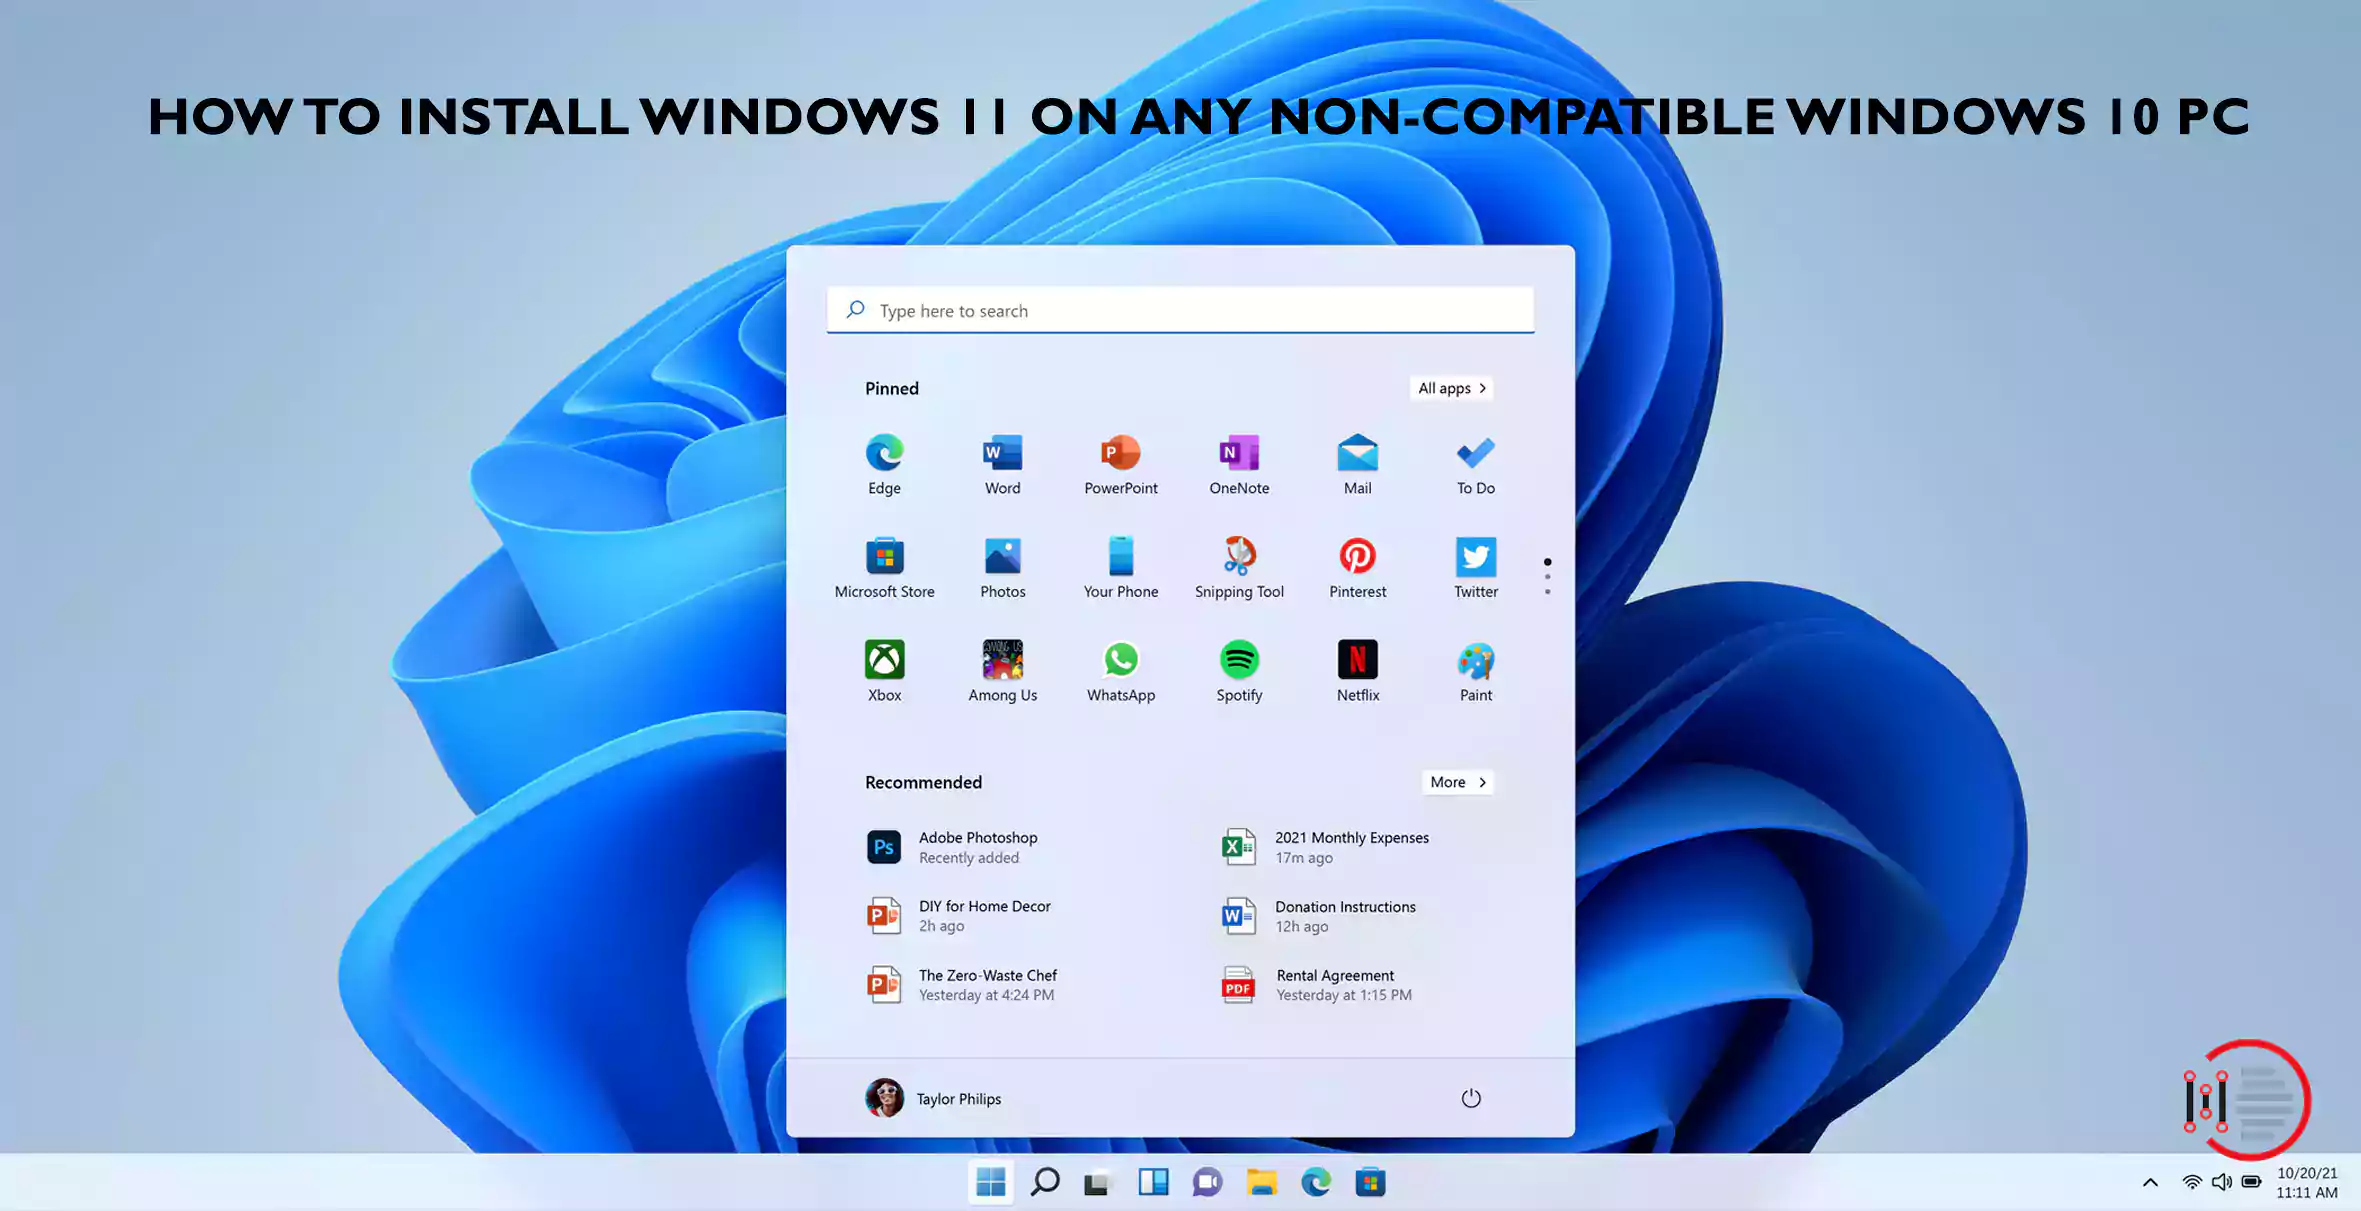 How to install Windows 11 on any non-compatible windows 10 PC